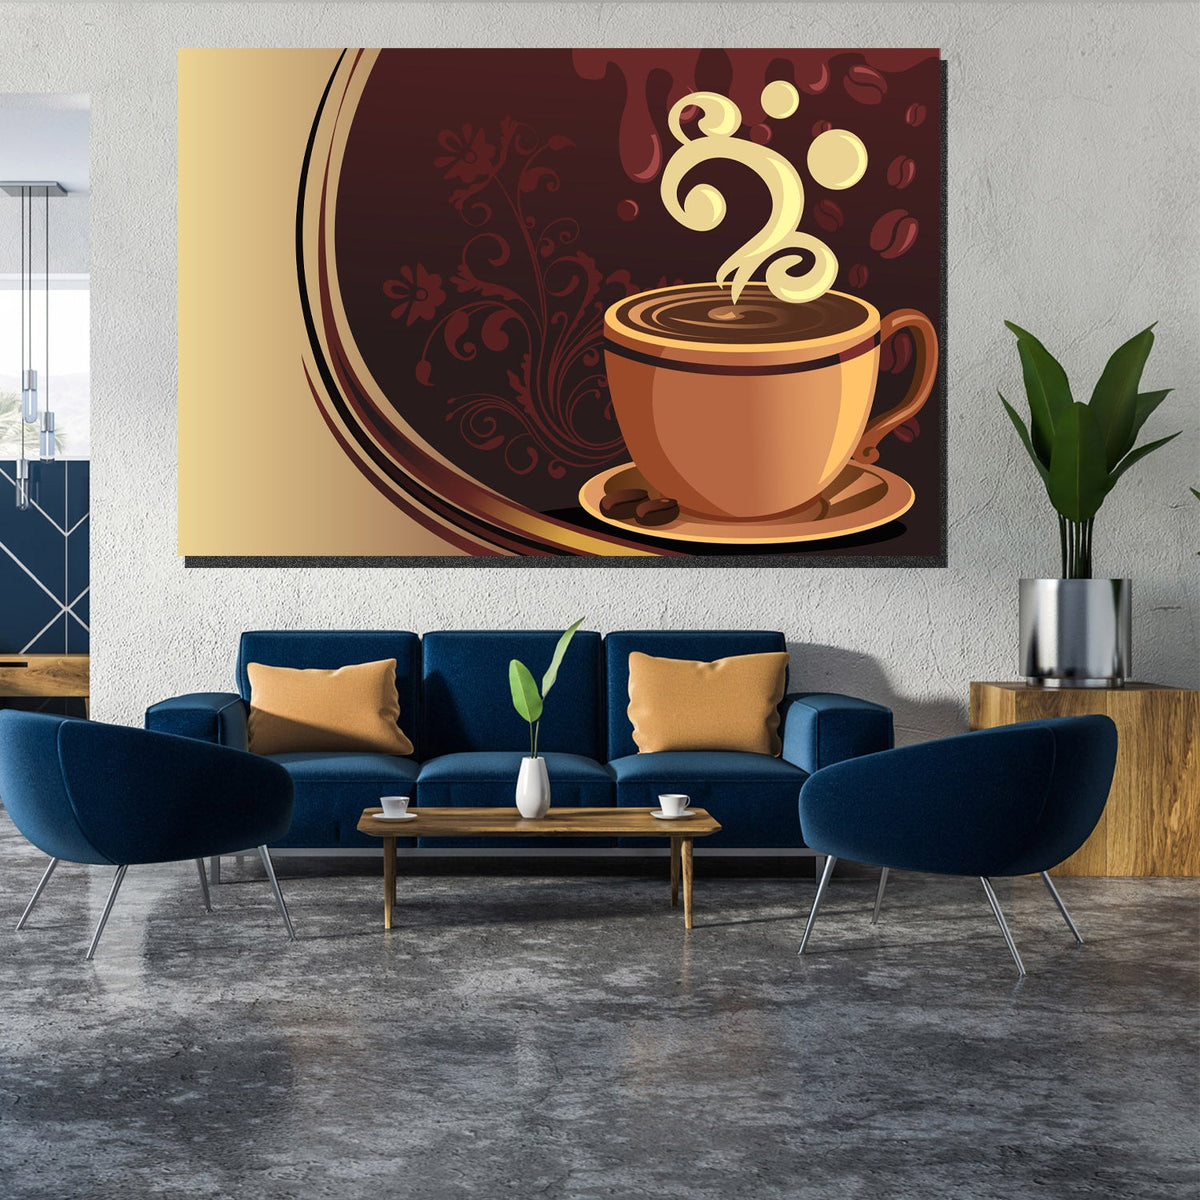 https://cdn.shopify.com/s/files/1/0387/9986/8044/products/CoffeeCupPosterCanvasArtprintStretched-3.jpg